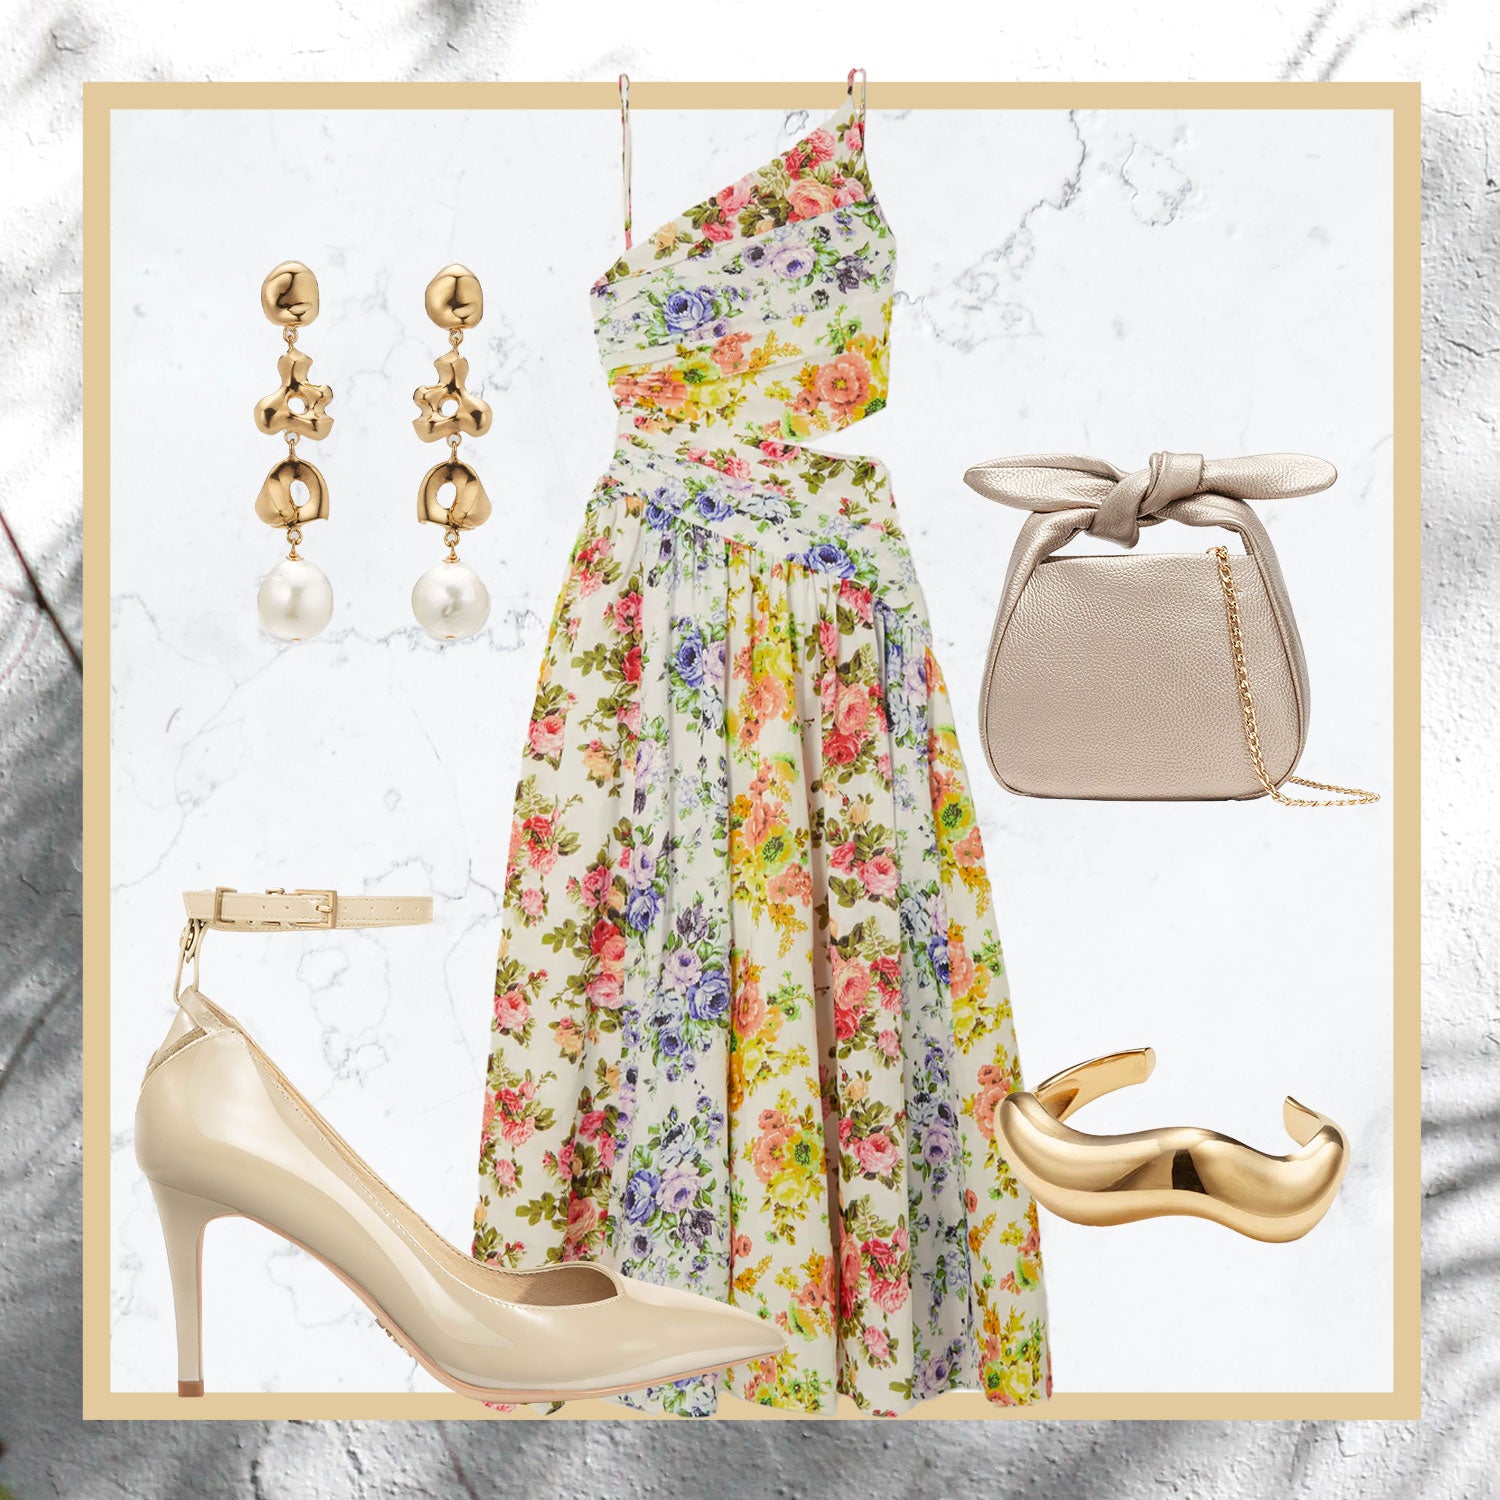 Clockwise from left: AGMES Diane drop earrings, Zimmermann organic linen floral print midi dress, Cuyana mini bow bag, AGMES Astrid cuff, and VEERAH neo-patent Frida pumps with Reversible Strap